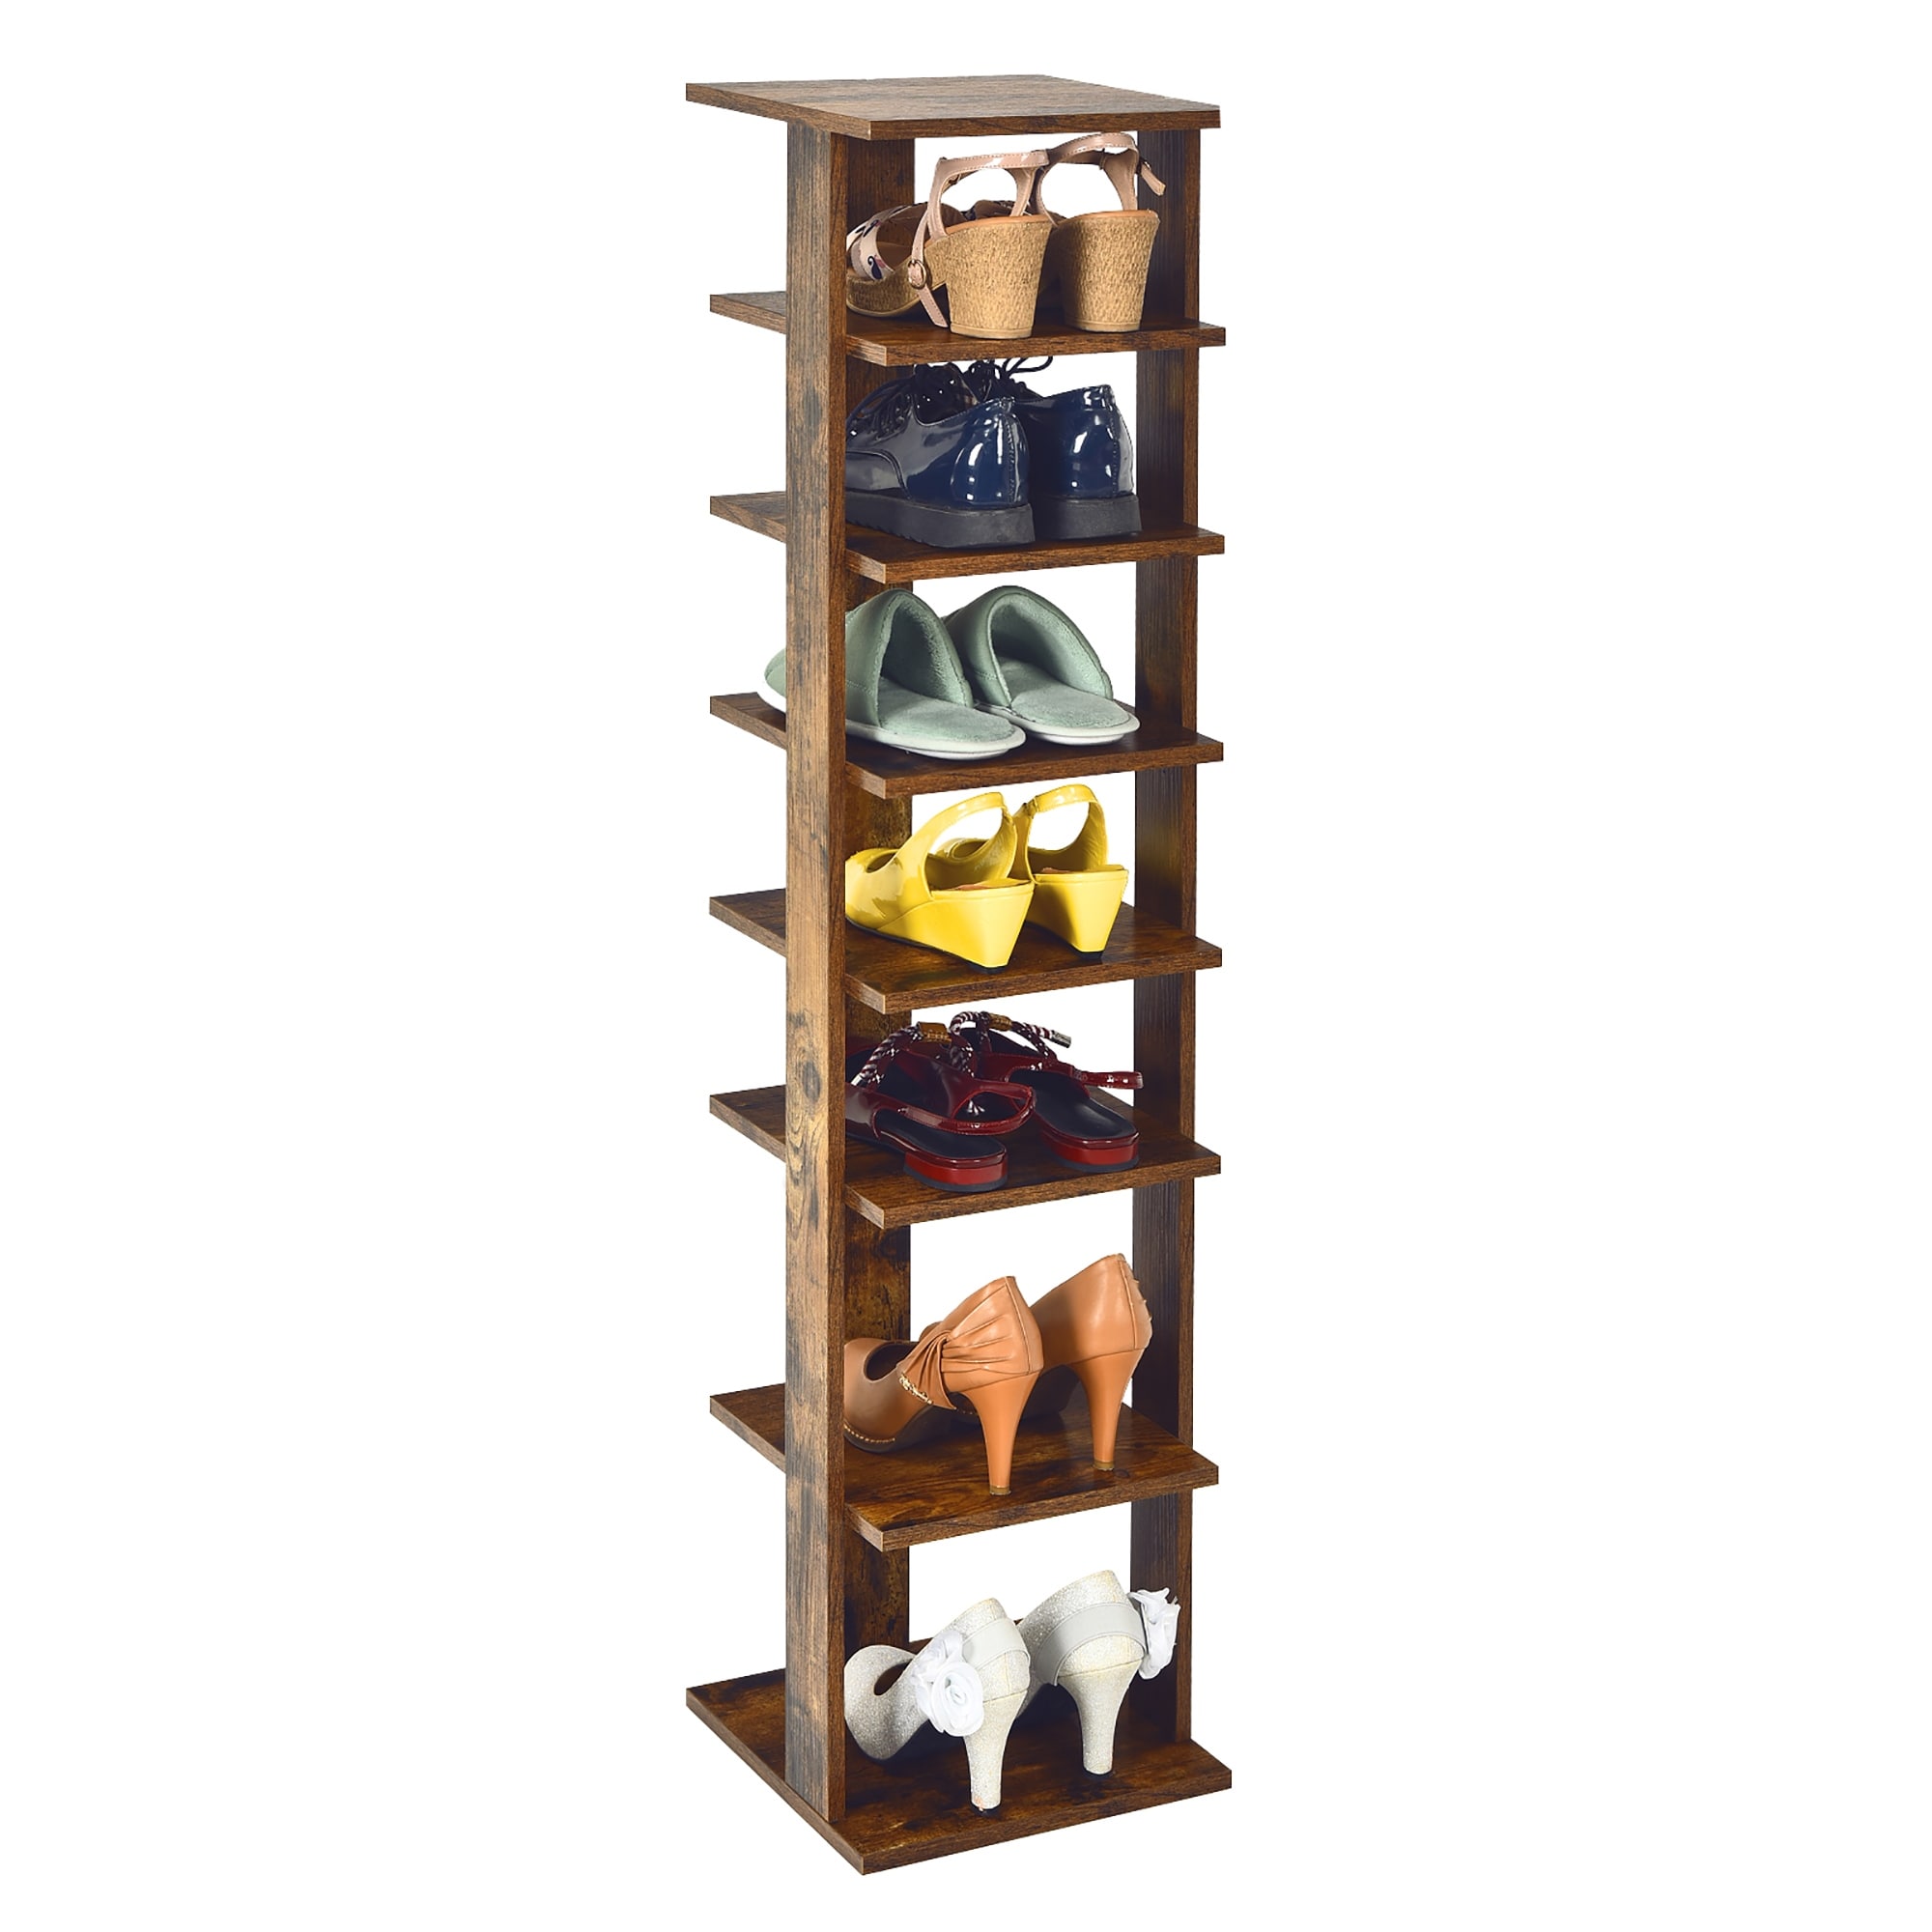 https://ak1.ostkcdn.com/images/products/is/images/direct/d8a35d811a6d536b3b31979ccfc274a3abf0d85f/Costway-7-Tier-Shoe-Rack-Free-Standing-Shelf-Storage-Tower-Rustic.jpg